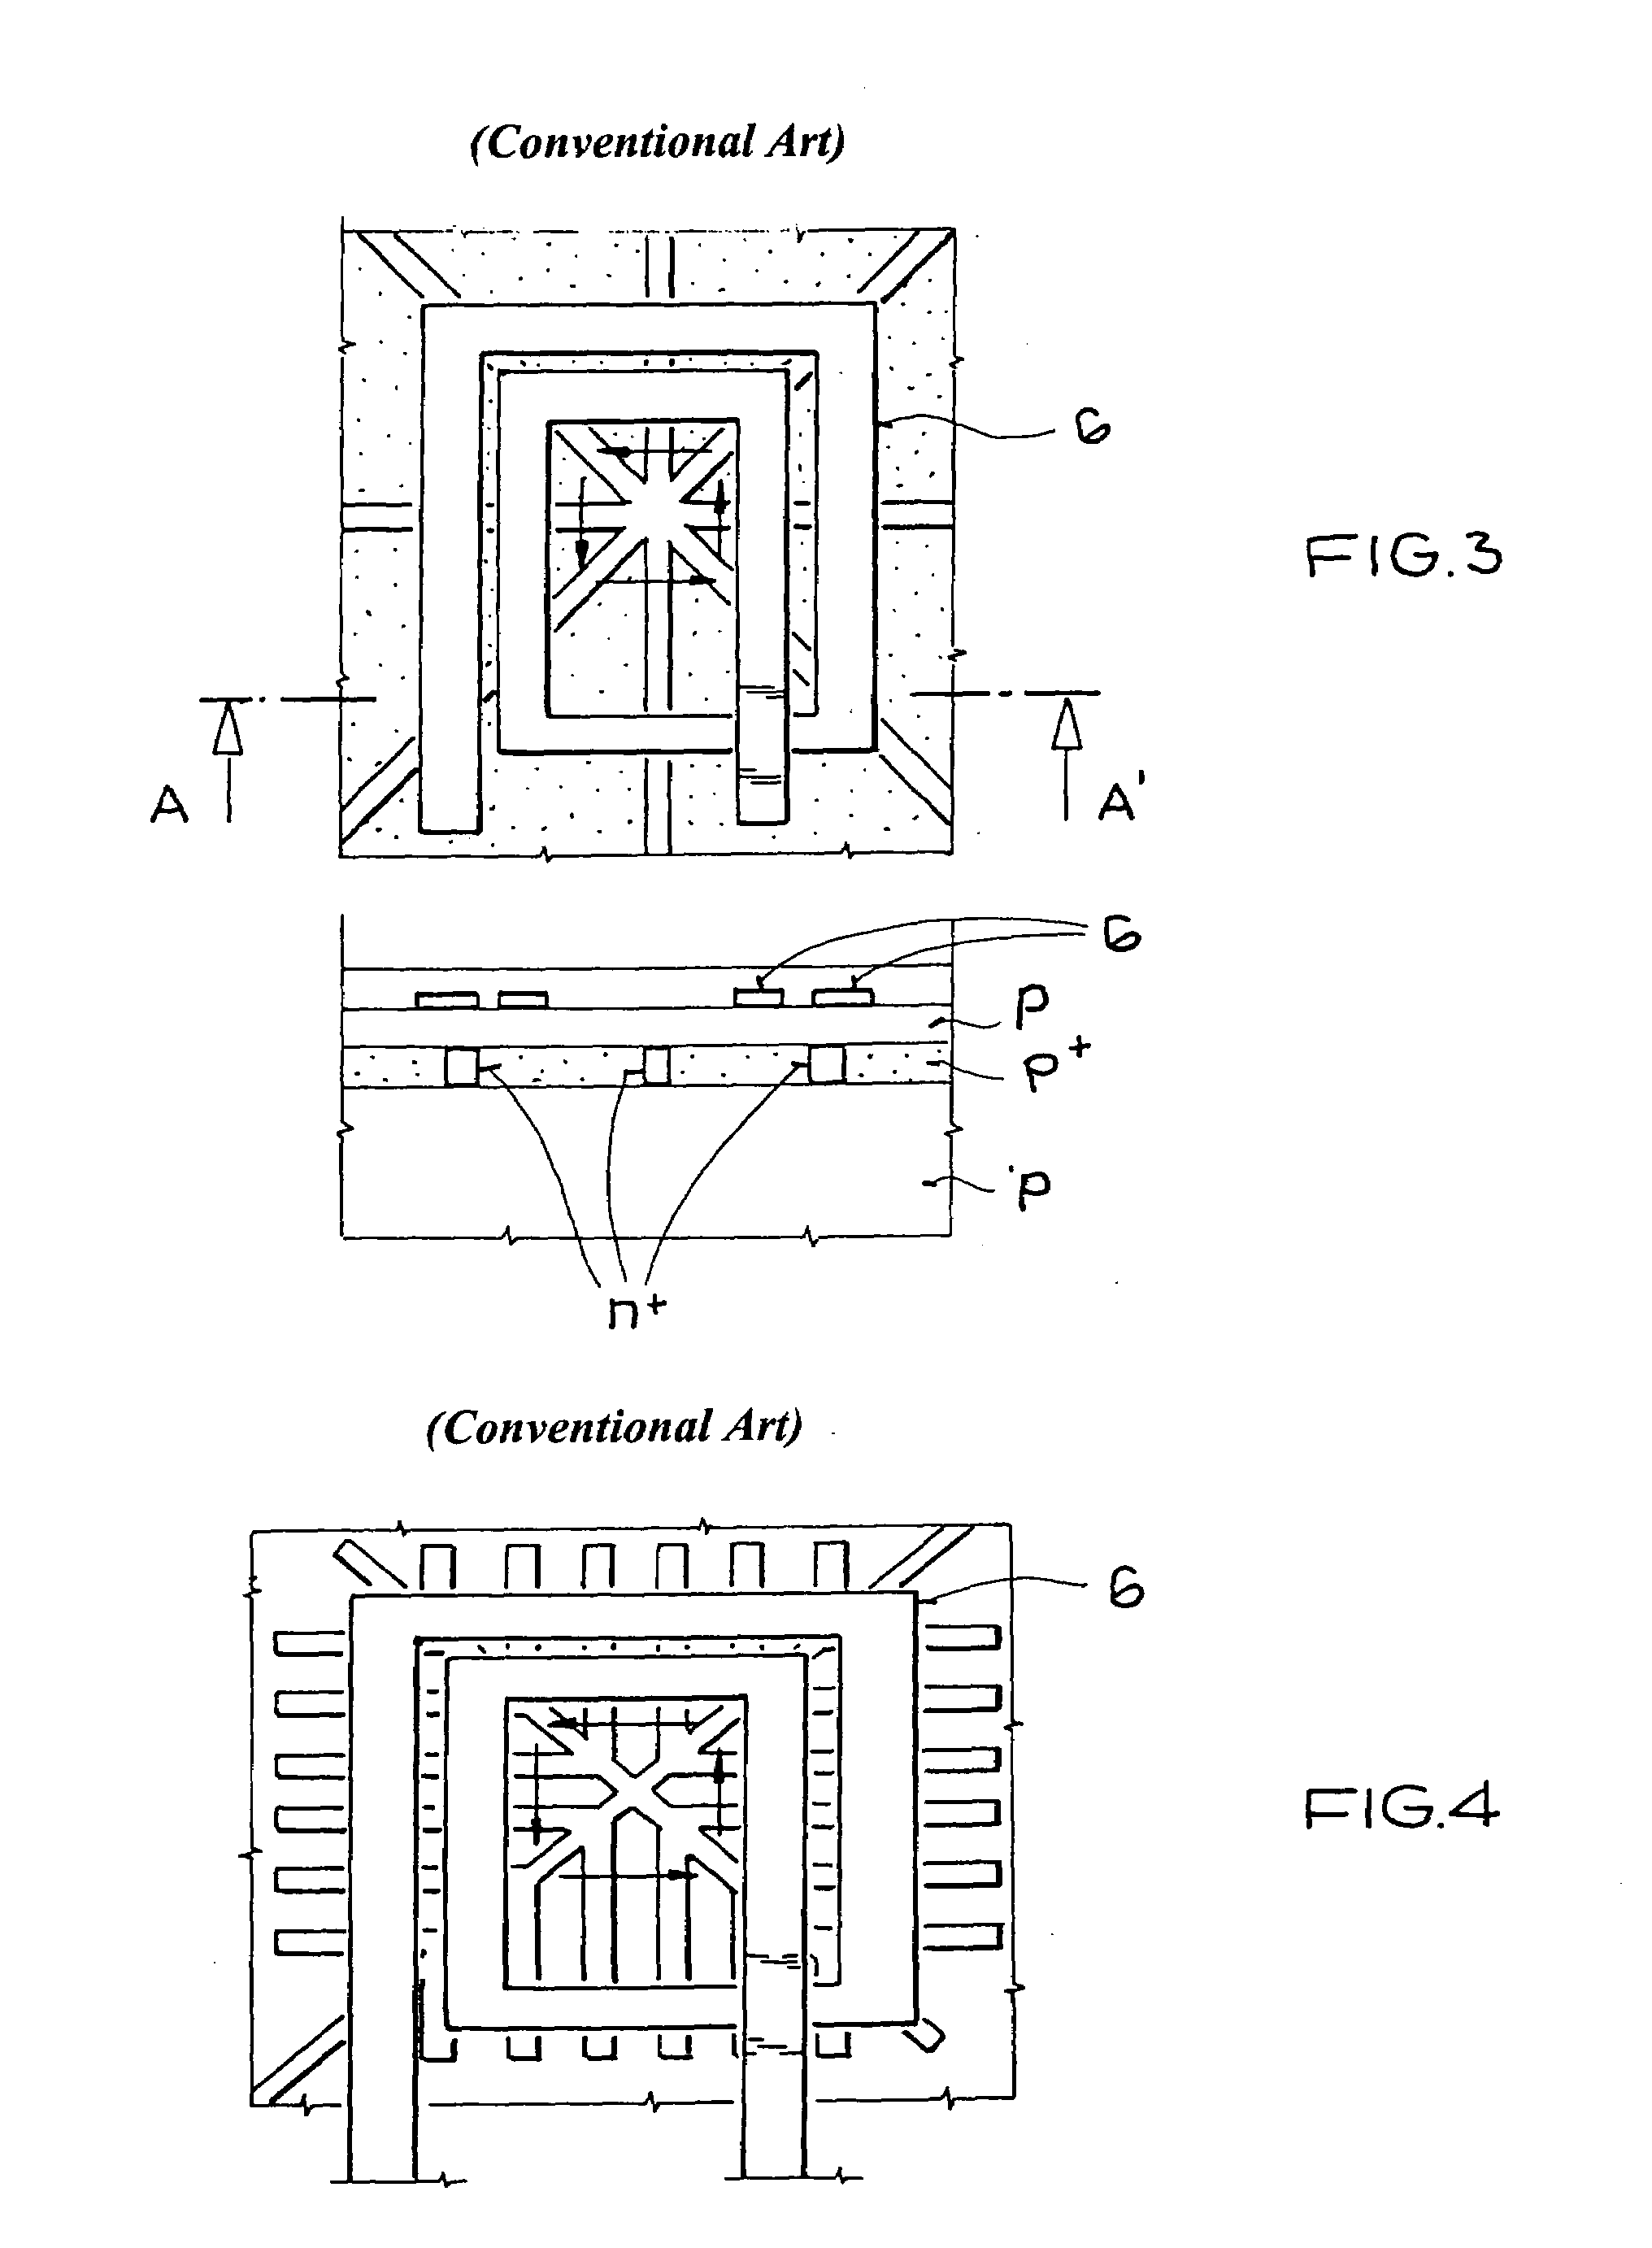 Method for producing a spiral inductance on a substrate, and a device fabricated according to such a method